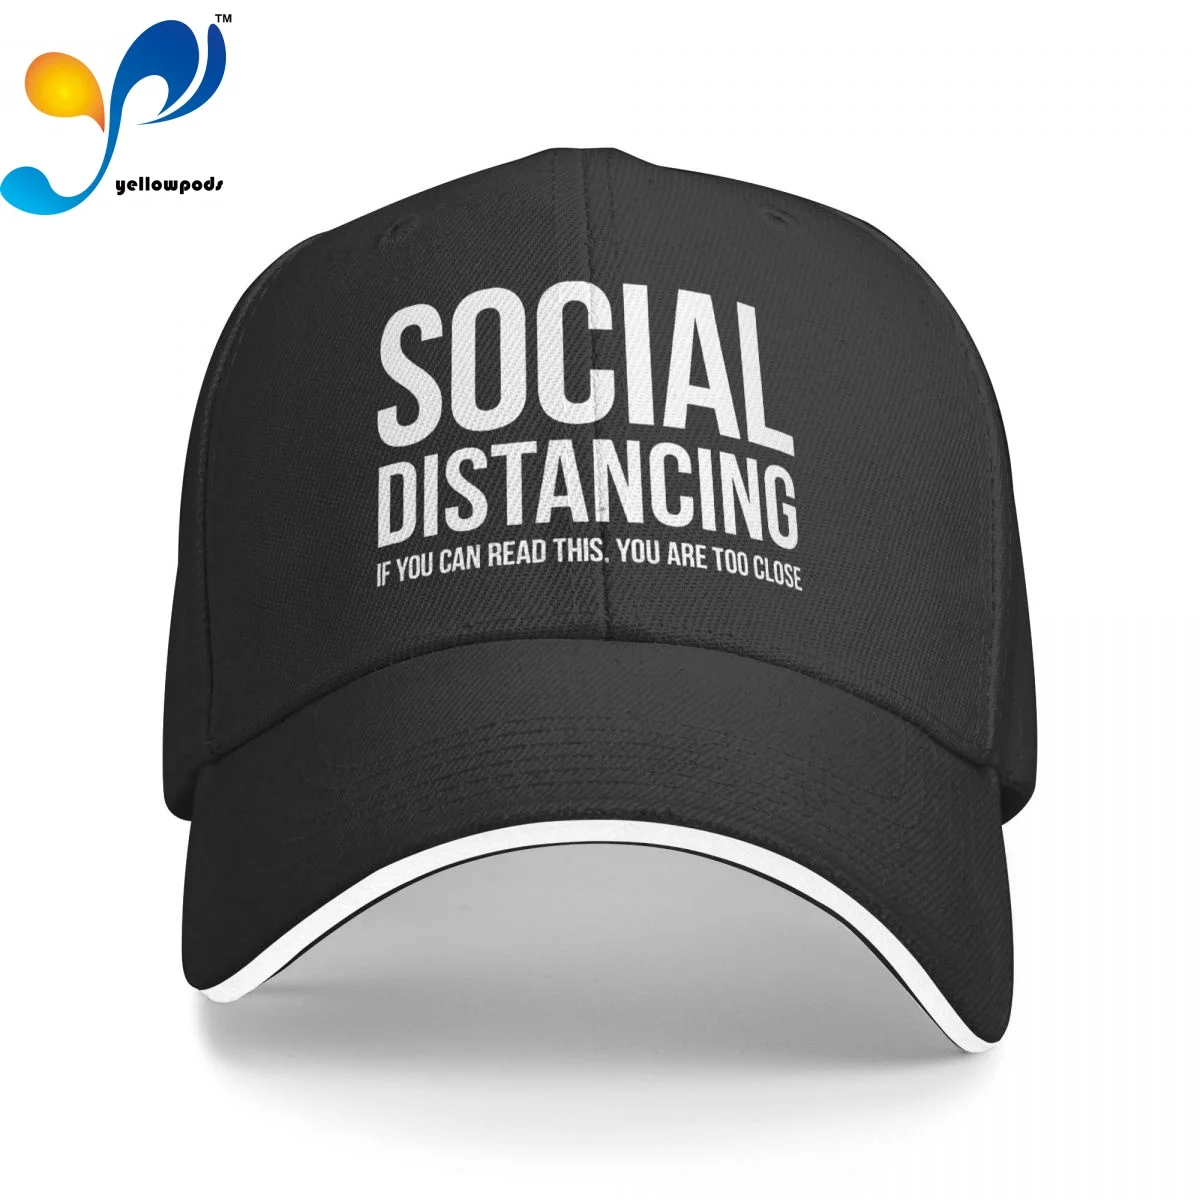 

Unisex Cotton Cap For Women Men SOCIAL DISTANCING IF YOU CAN READ THIS YOU RE TOO CLOSE Fashion Baseball Cap Adjustable